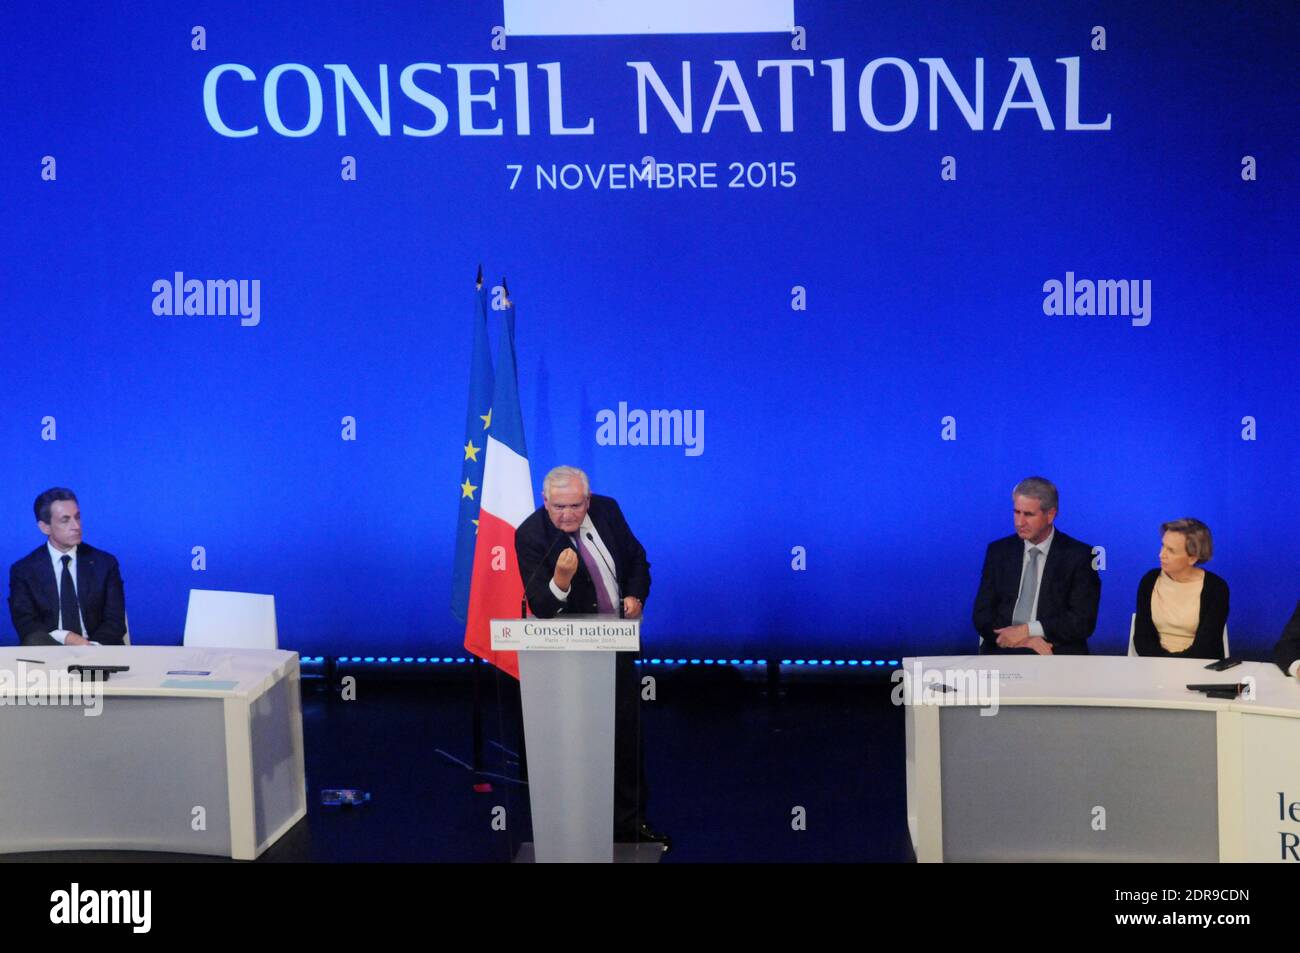 President of the right-wing party Les Republicains Nicolas Sarkozy, President of LR's national council and former prime minister Jean-Pierre Raffarin during the national council of Les Republicans party in Paris, France, on November 7, 2015. Photo by Alain Apaydin/ABACAPRESS.COM Stock Photo